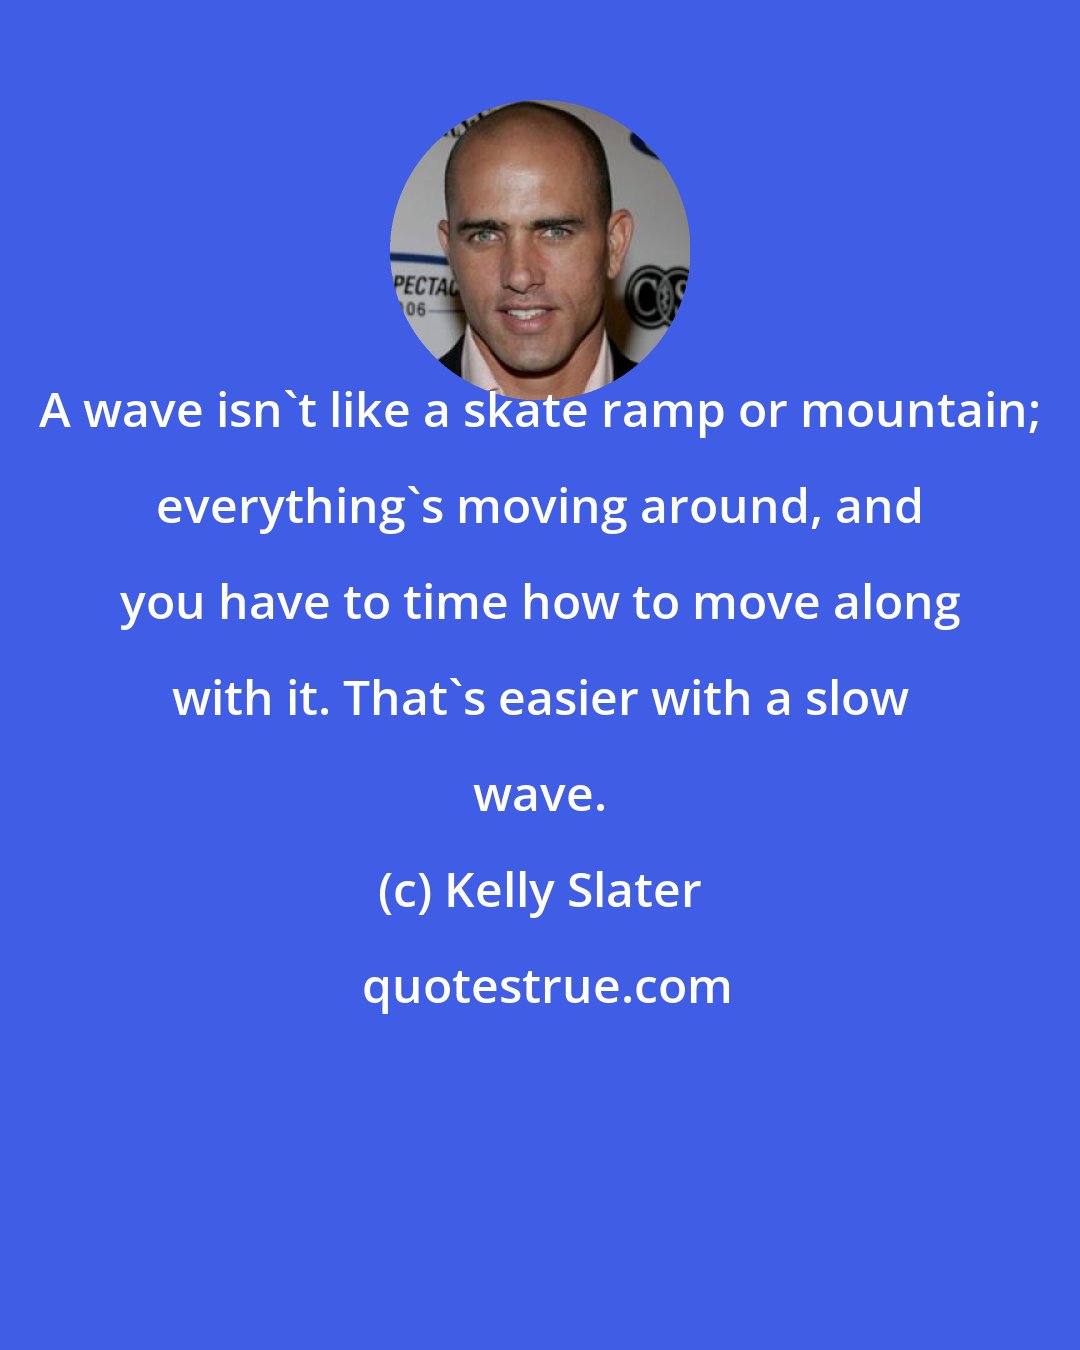 Kelly Slater: A wave isn't like a skate ramp or mountain; everything's moving around, and you have to time how to move along with it. That's easier with a slow wave.